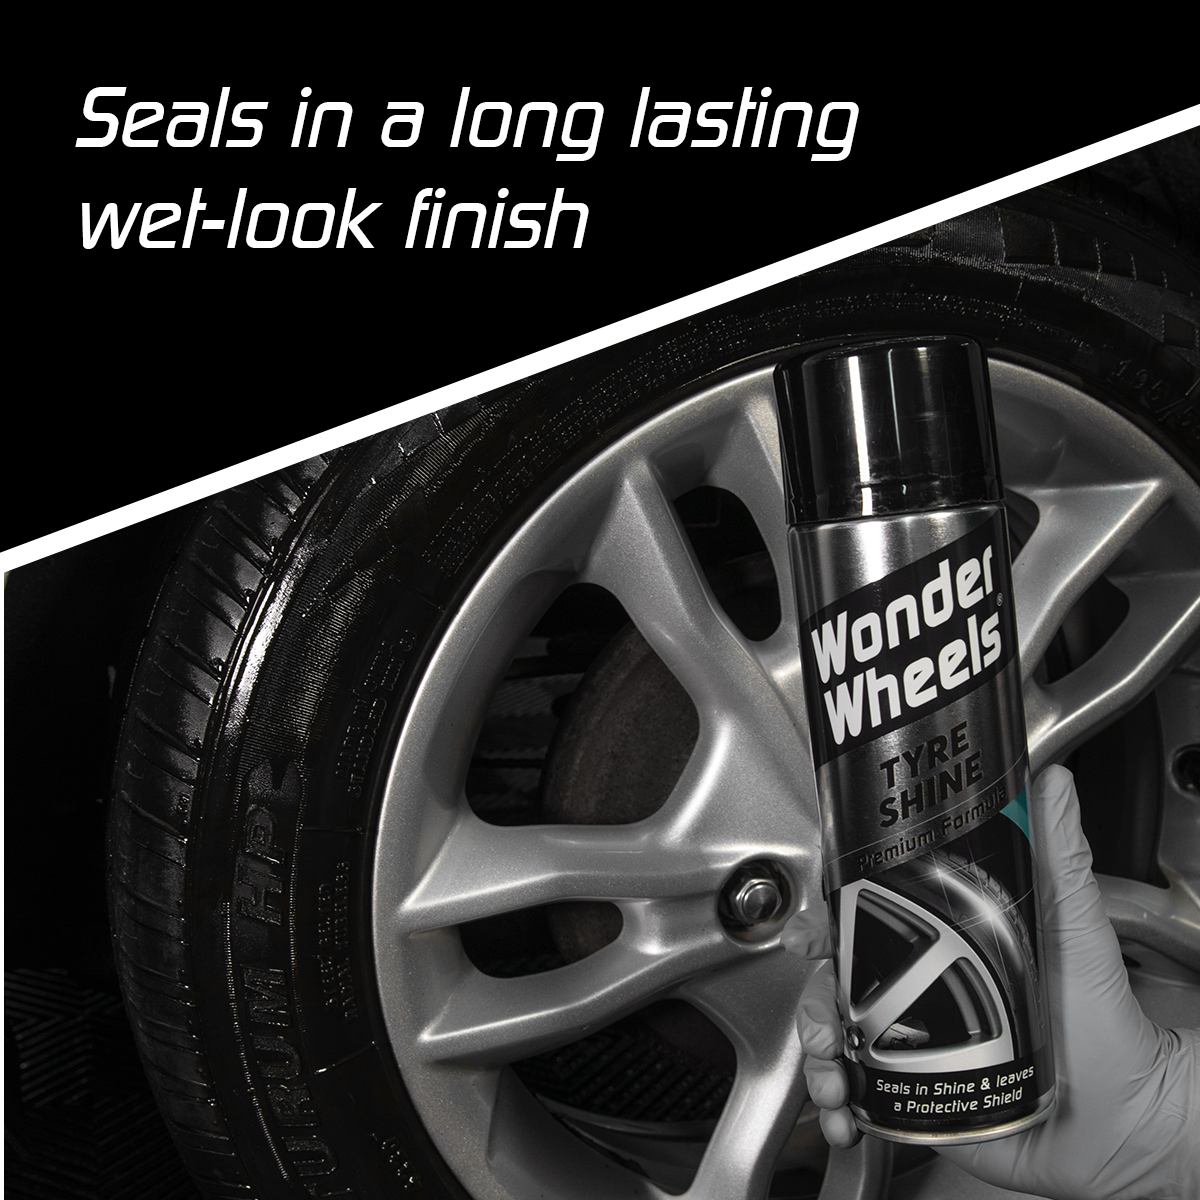 Seals in a long lasting wet-look finish